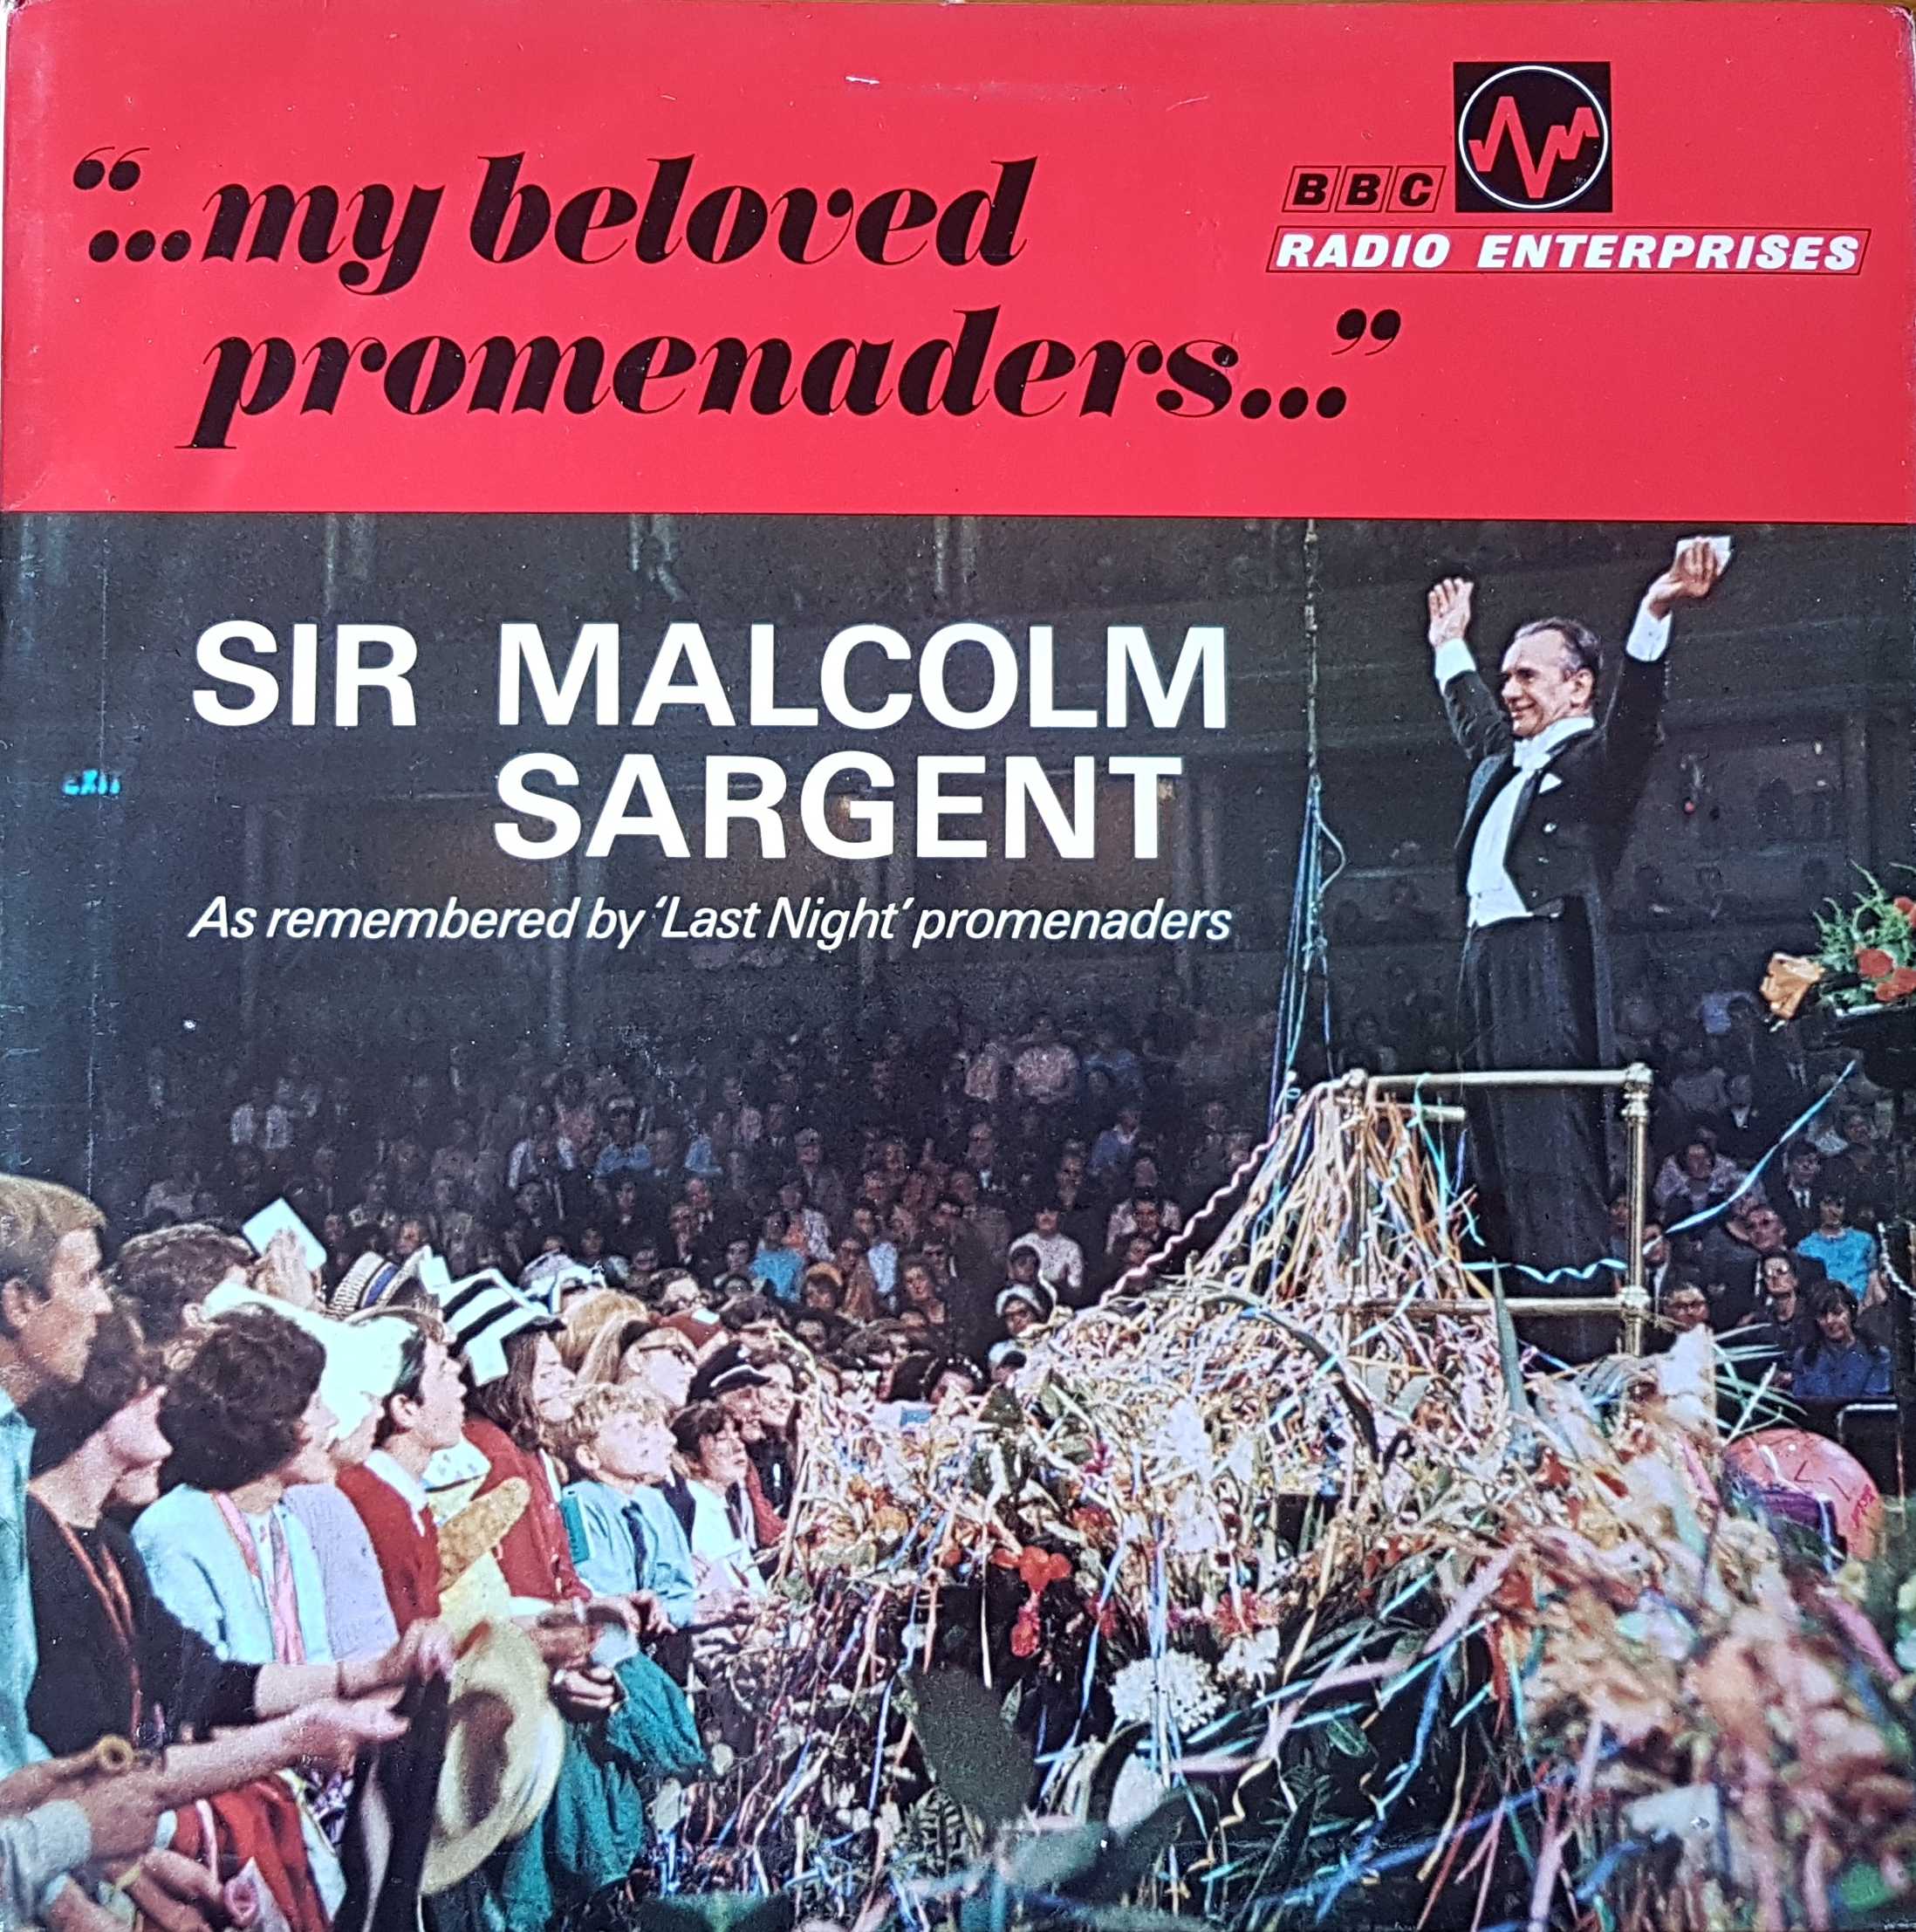 Picture of REC 22 ' My beloved promenaders ' by artist Sir Malcolm Sargent from the BBC albums - Records and Tapes library